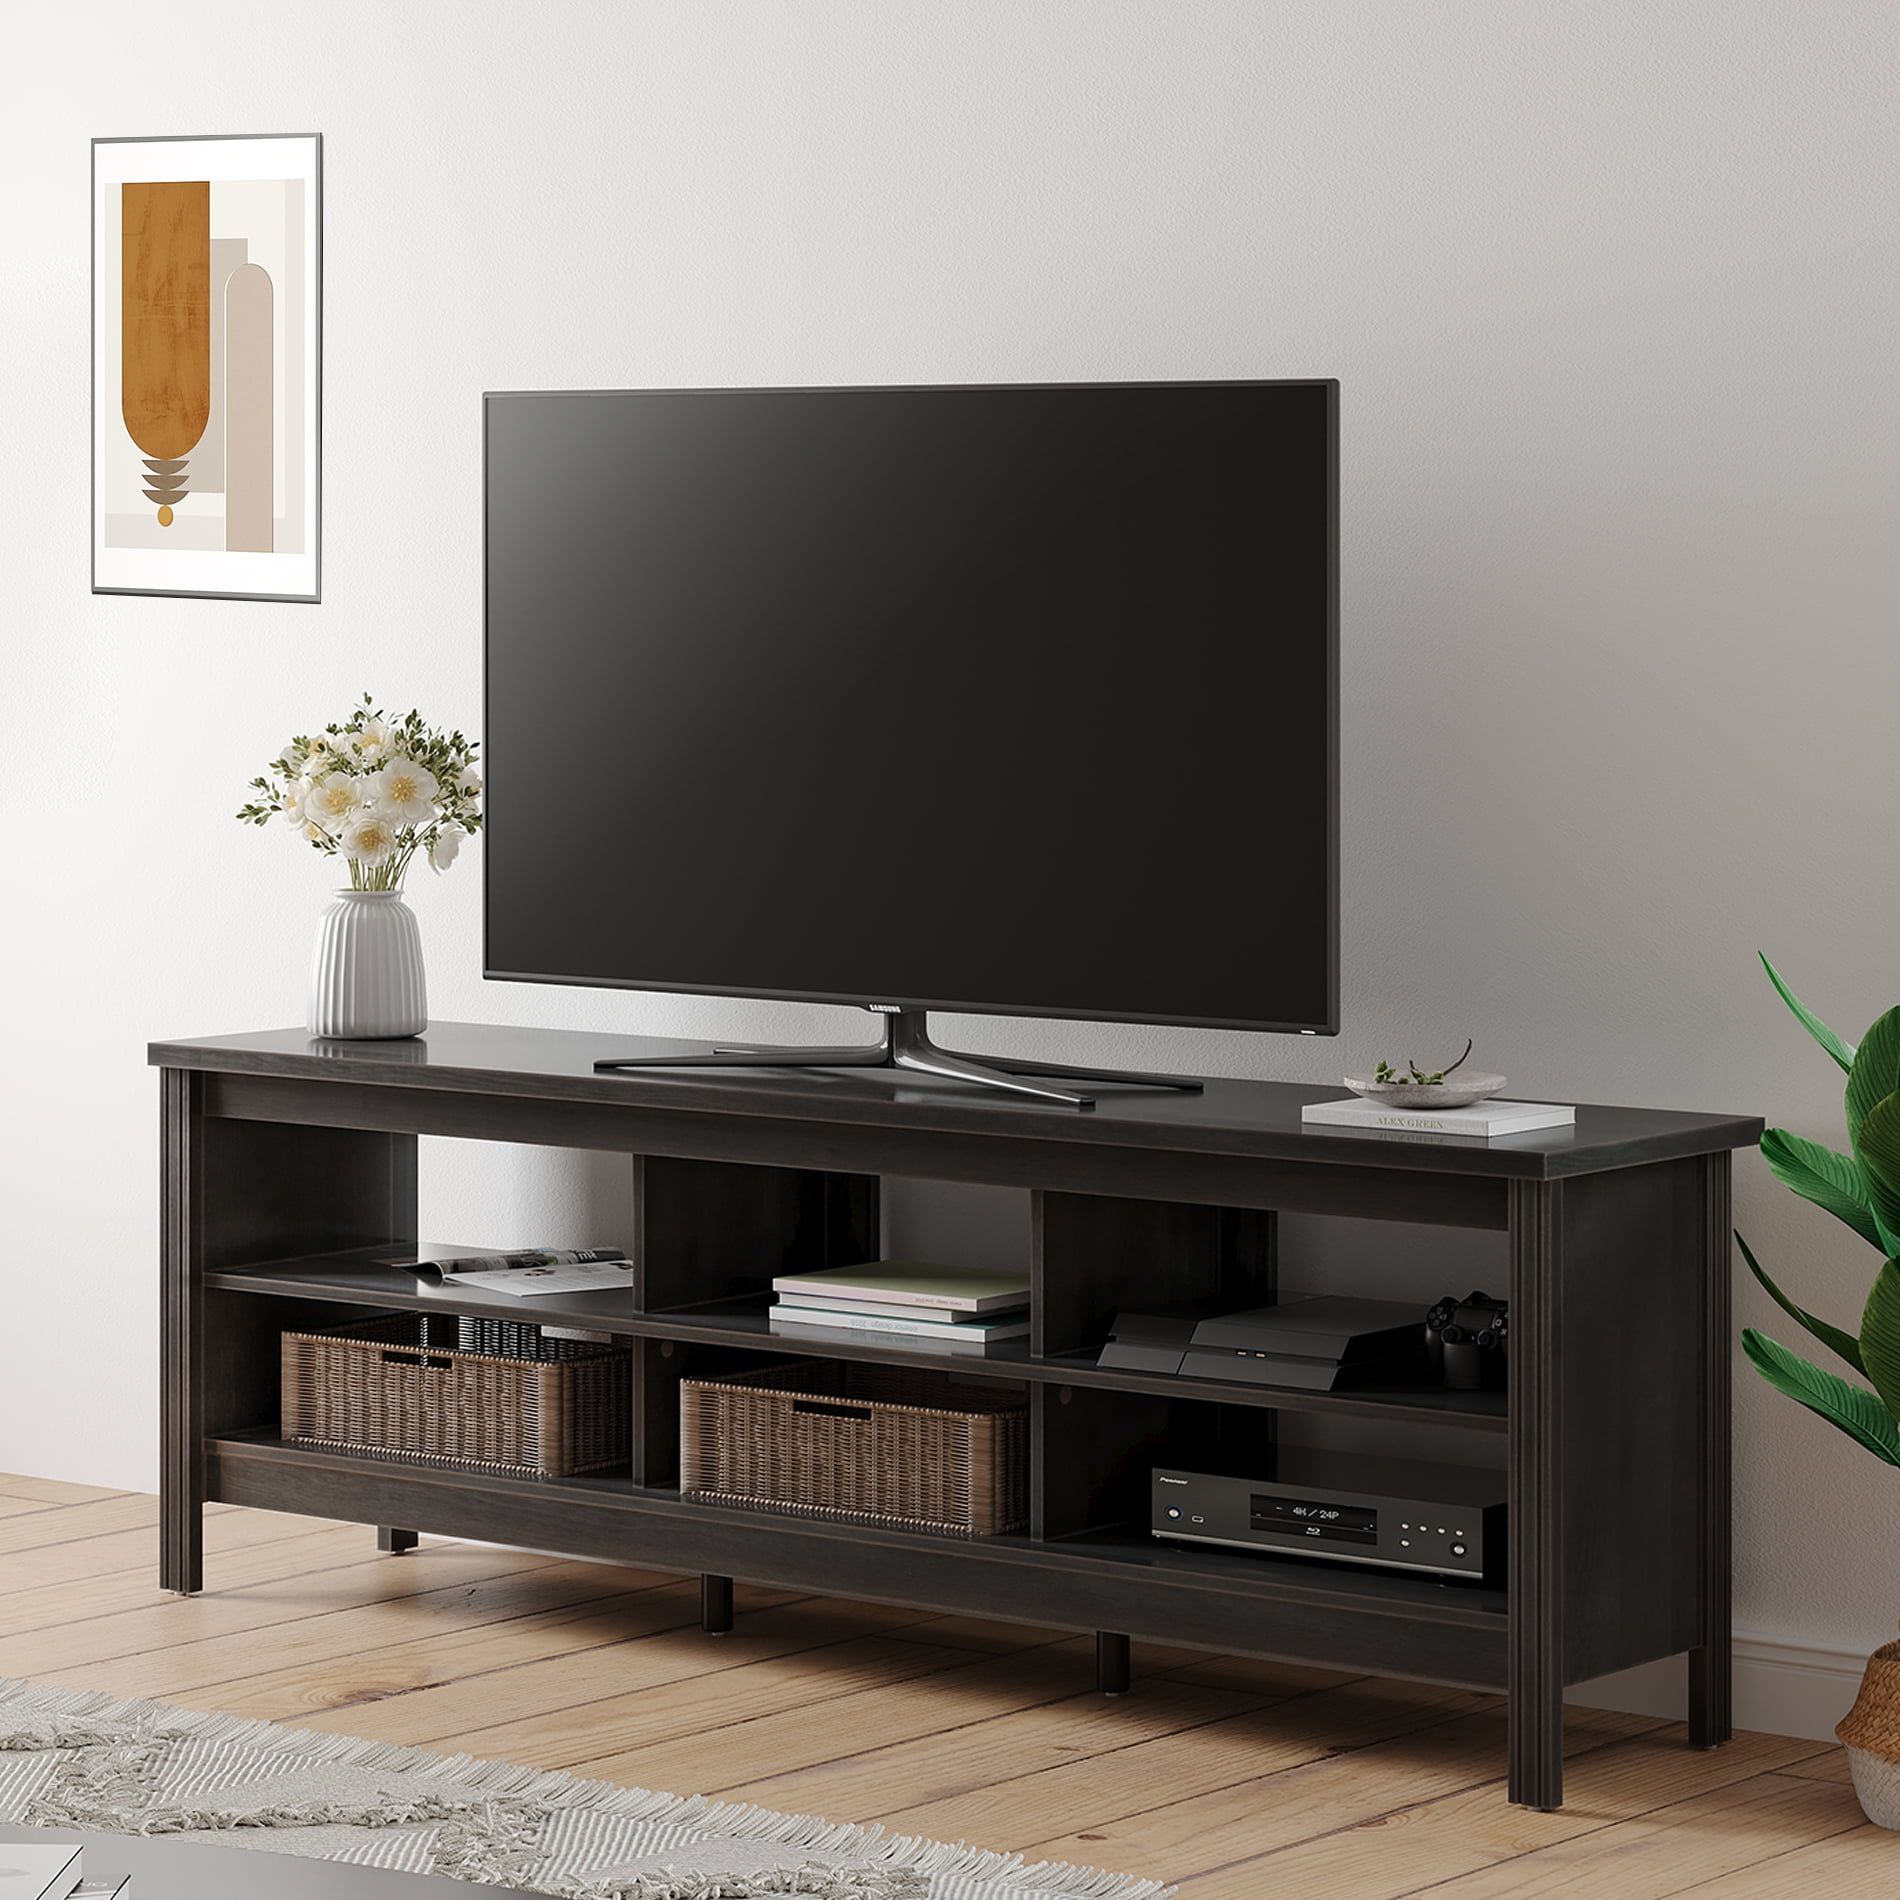 Yuyke Tv Stand For 75 Inch Tv Wood Media Console Cabinet, Tv In Bestier Tv Stand For Tvs Up To 75&quot; (View 12 of 20)